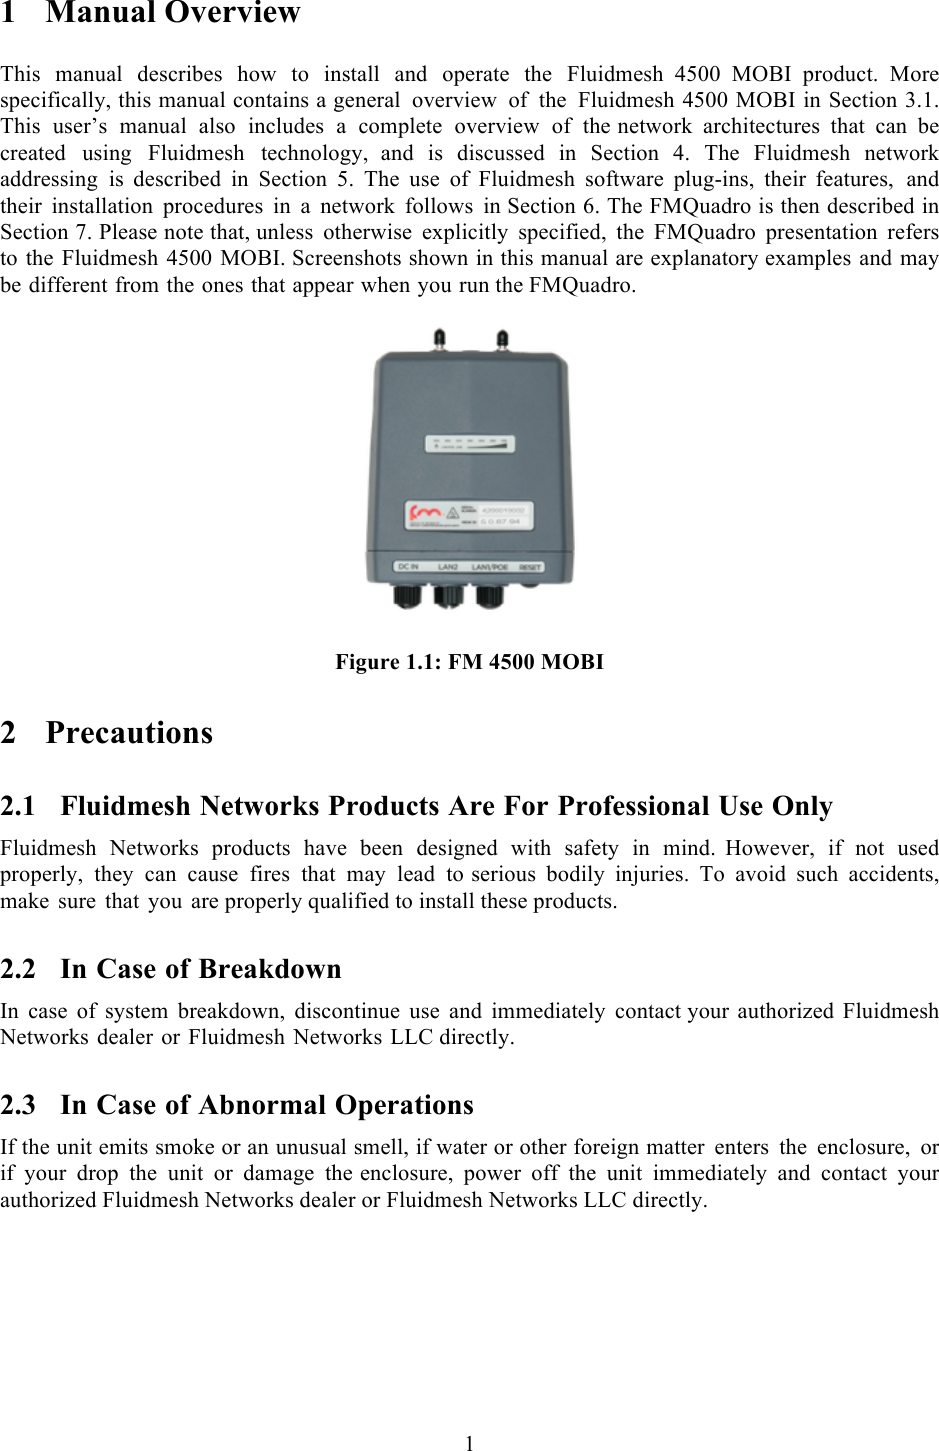  1  1 Manual Overview  This manual describes how to install and operate the Fluidmesh 4500 MOBI product.  More specifically, this manual contains a general overview of the Fluidmesh 4500 MOBI in Section 3.1. This user’s manual also includes  a  complete overview of the network architectures that can be created using Fluidmesh technology,  and is discussed in Section 4. The Fluidmesh network addressing is  described in Section 5. The use of Fluidmesh software plug-ins, their  features, and their installation procedures in a network follows in Section 6. The FMQuadro is then described in Section 7. Please note that, unless otherwise explicitly specified, the FMQuadro presentation refers to the Fluidmesh 4500 MOBI. Screenshots shown in this manual are explanatory examples and may be different from the ones that appear when you run the FMQuadro.   Figure 1.1: FM 4500 MOBI2 Precautions 2.1 Fluidmesh Networks Products Are For Professional Use Only Fluidmesh Networks products have been designed with safety in mind.  However, if not used properly, they can cause fires that may lead to serious bodily injuries. To avoid such accidents, make sure that you are properly qualified to install these products. 2.2 In Case of Breakdown In case of system breakdown, discontinue use and immediately contact your authorized Fluidmesh Networks dealer or Fluidmesh Networks LLC directly. 2.3 In Case of Abnormal Operations If the unit emits smoke or an unusual smell, if water or other foreign matter enters the enclosure,  or if your drop the unit or damage the enclosure, power off the unit immediately and contact your authorized Fluidmesh Networks dealer or Fluidmesh Networks LLC directly. 